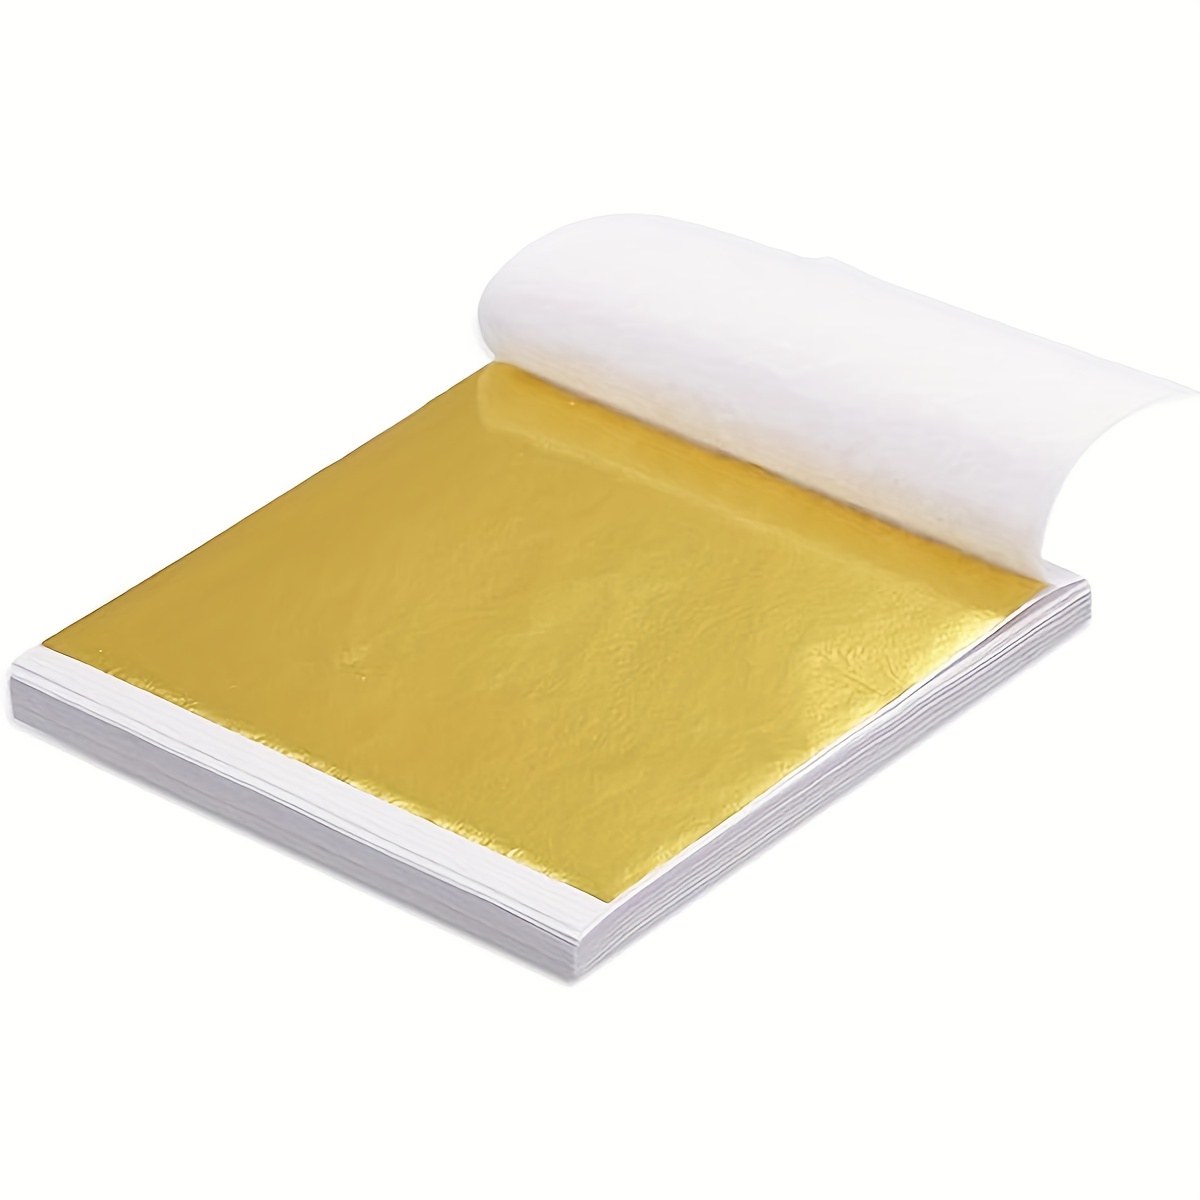 

100 Pcs Golden Leaf Sheets - High-quality Imitation Golden Foil For Crafts, Home Decor, Painting, Furniture, And Nail Art - Durable And Long-lasting